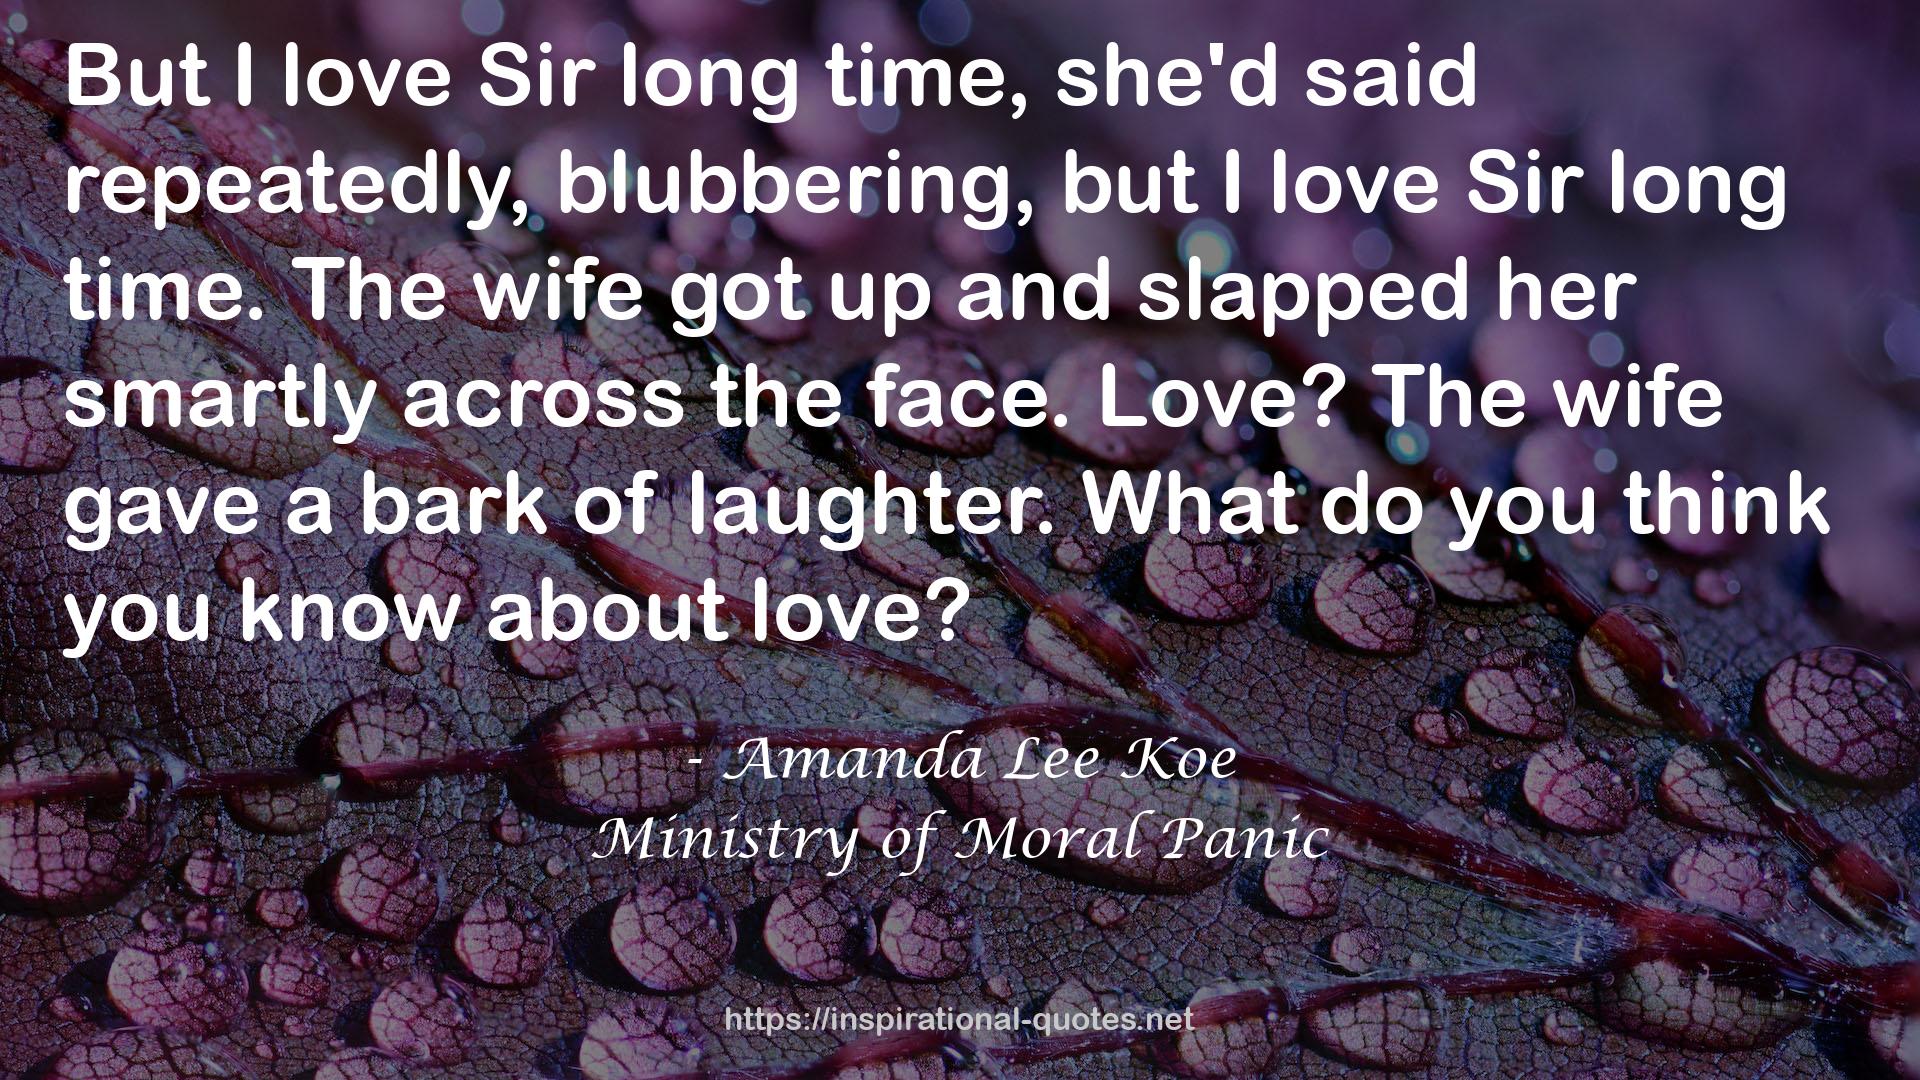 Ministry of Moral Panic QUOTES